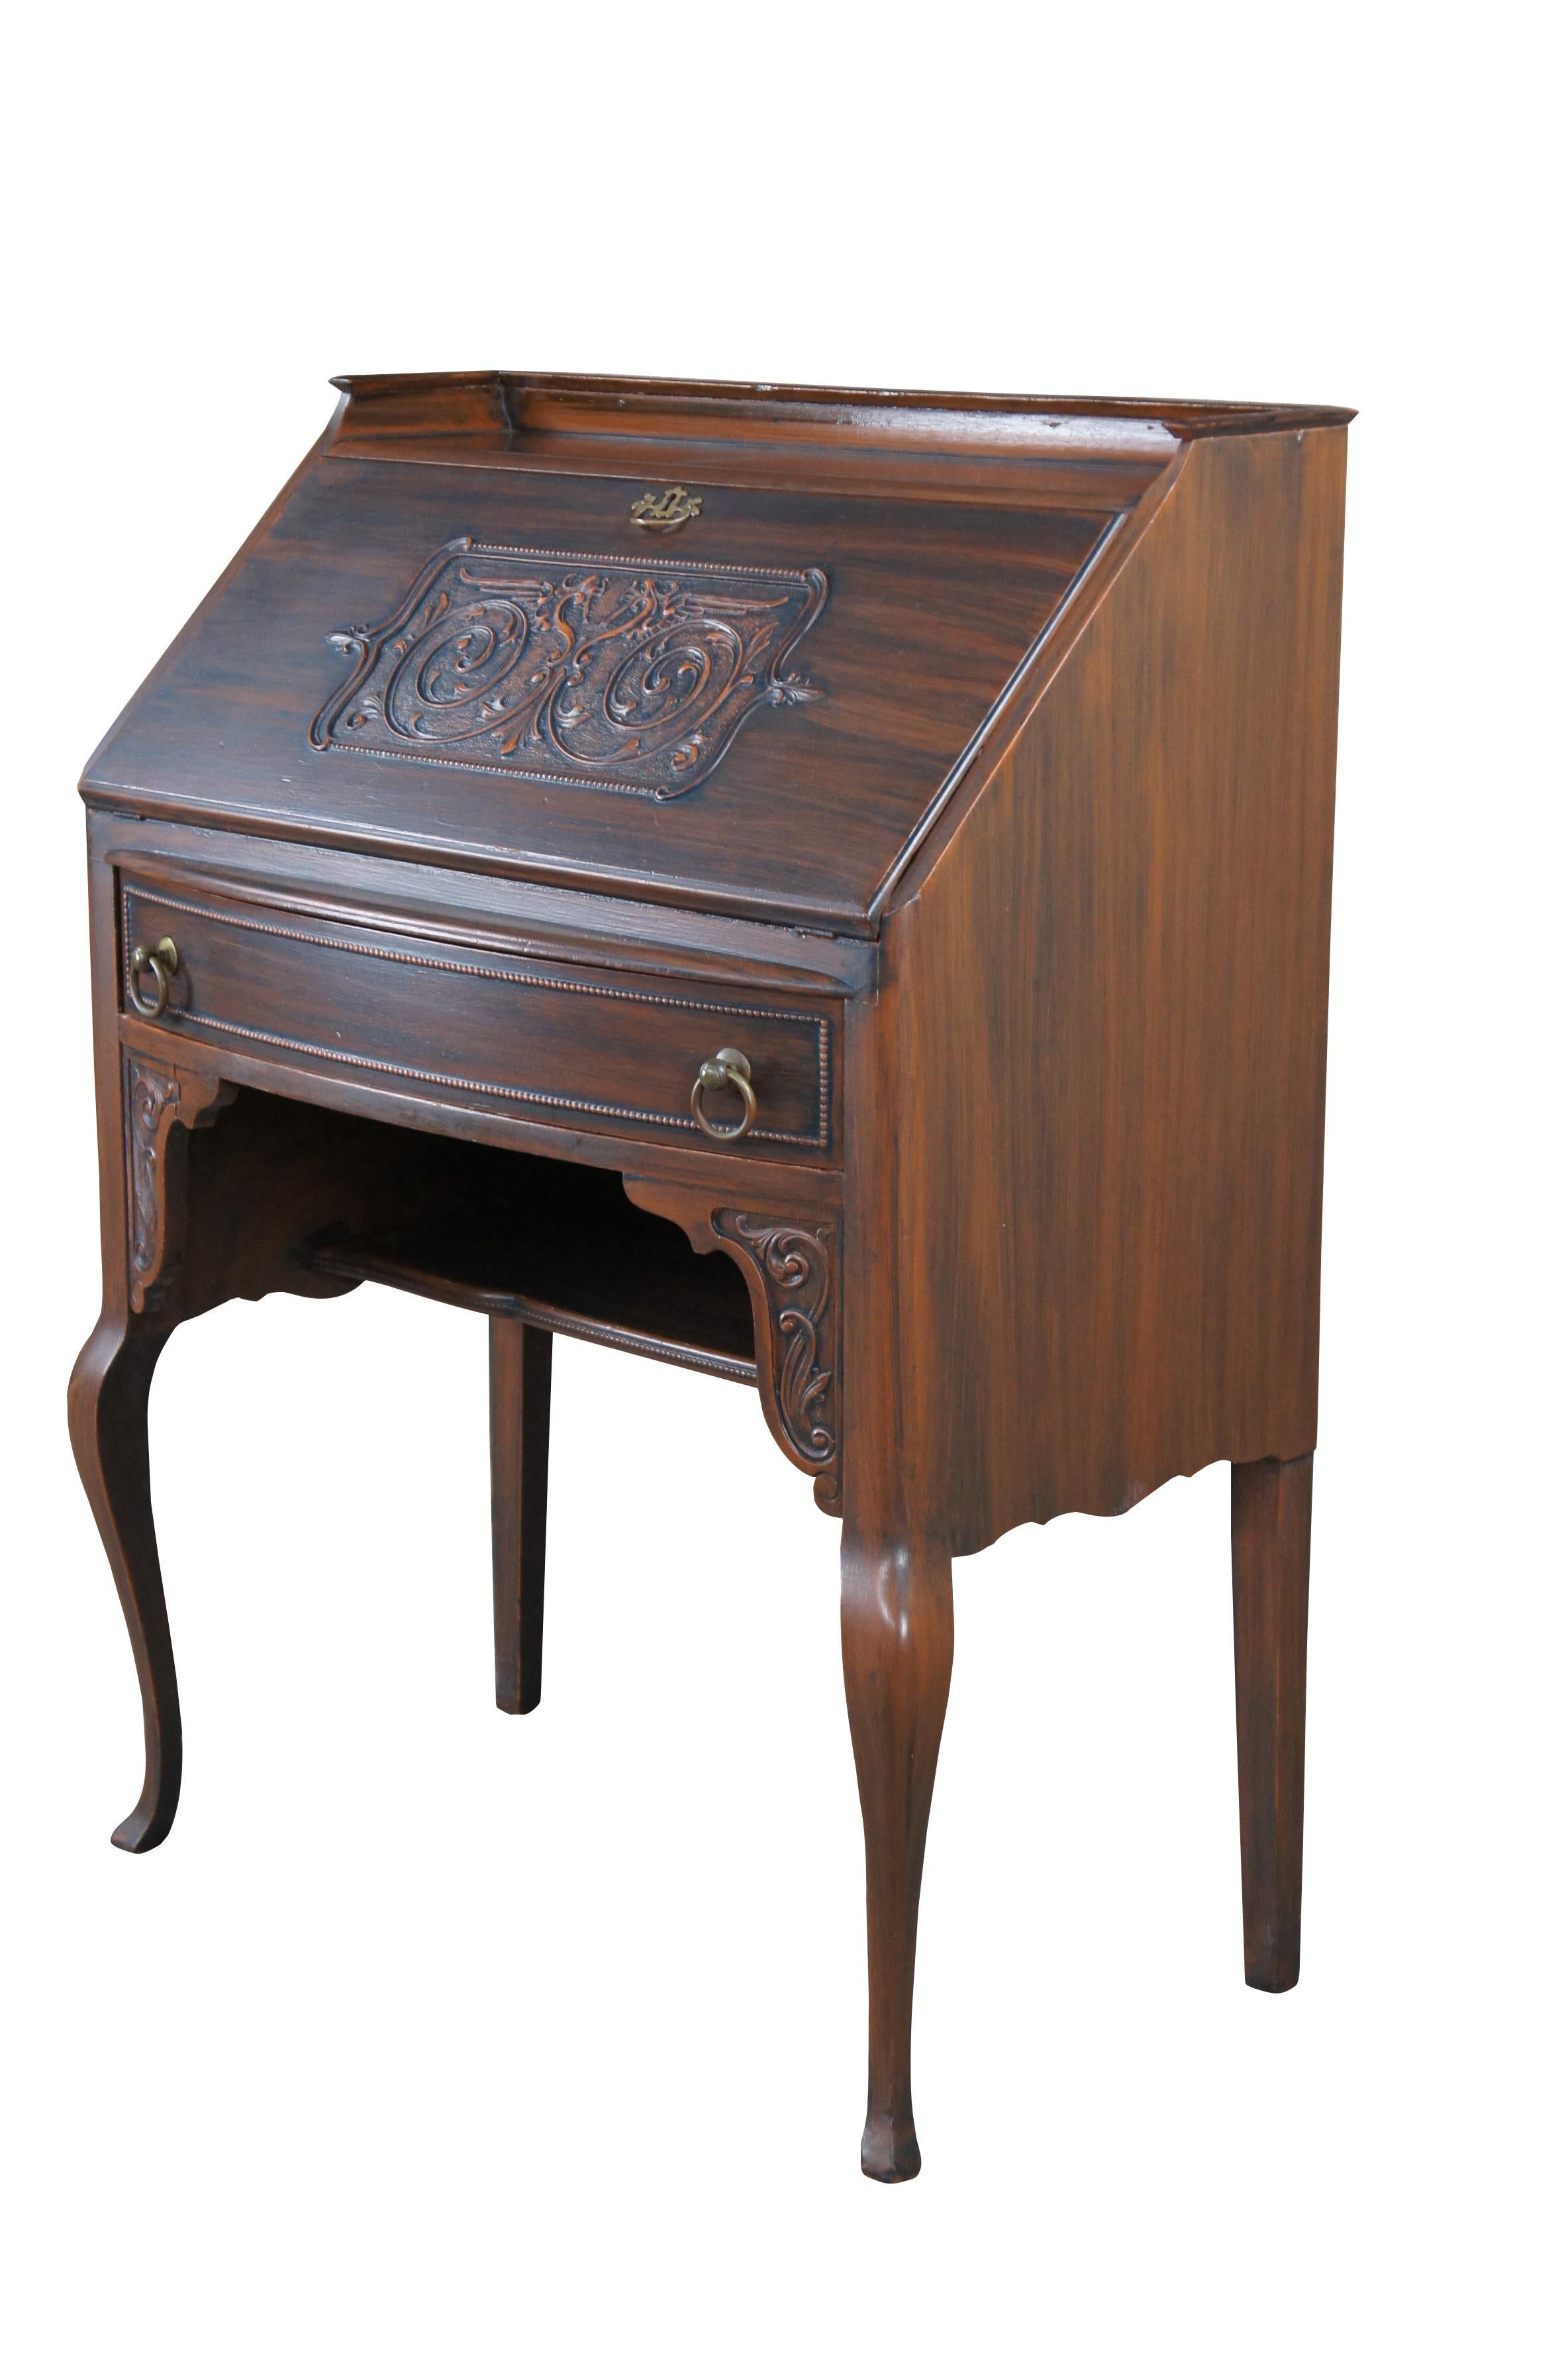 Antique Early 20th Century Victorian style secretary writing desk featuring painted grain finish and dragon / serpent / griffon carving.  The desk opens to large writing surface with multiple cubbies and compartments for storage; upper gallery,